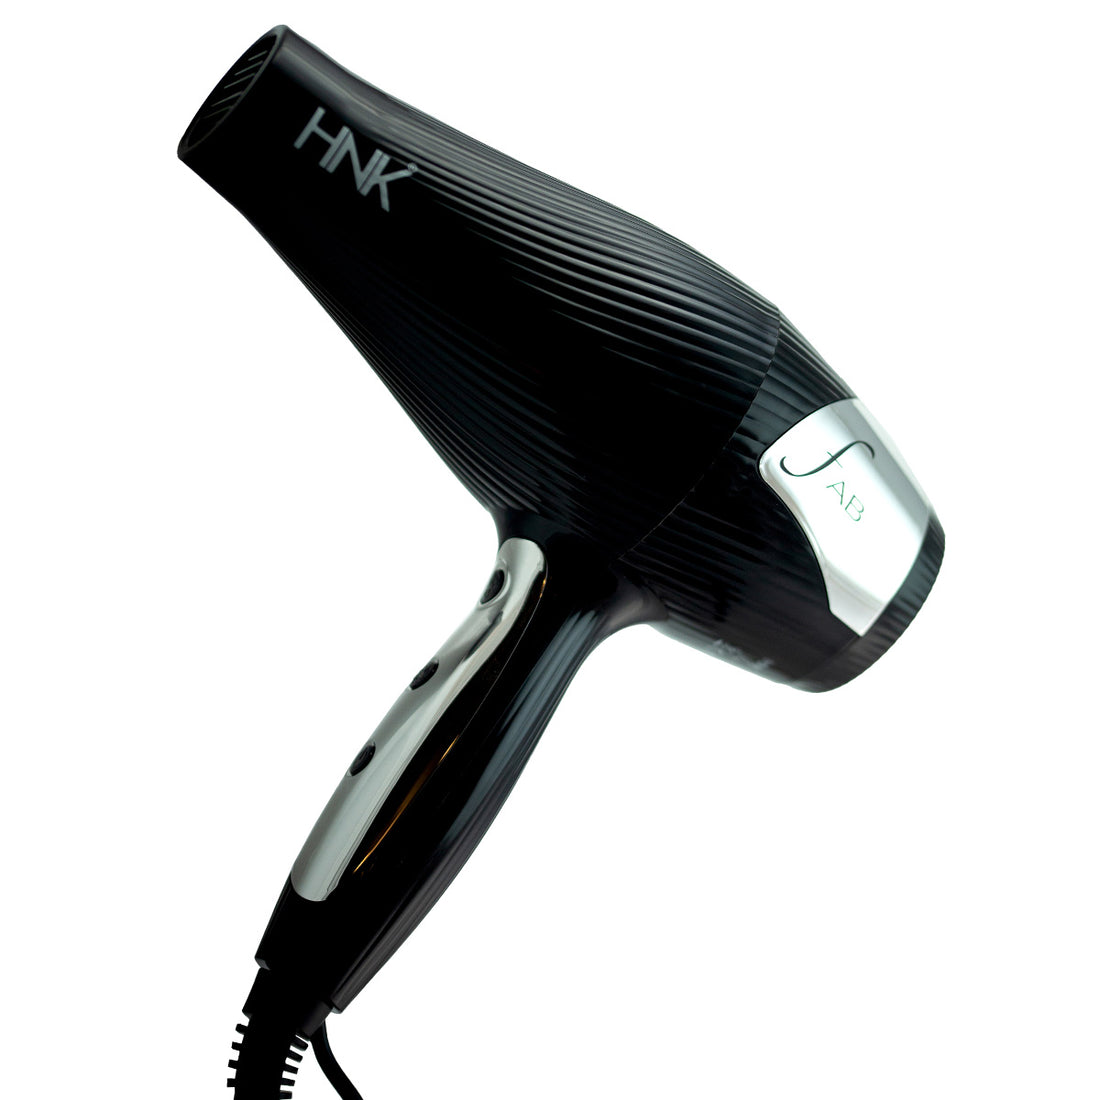 Fab Professional Hairdryer